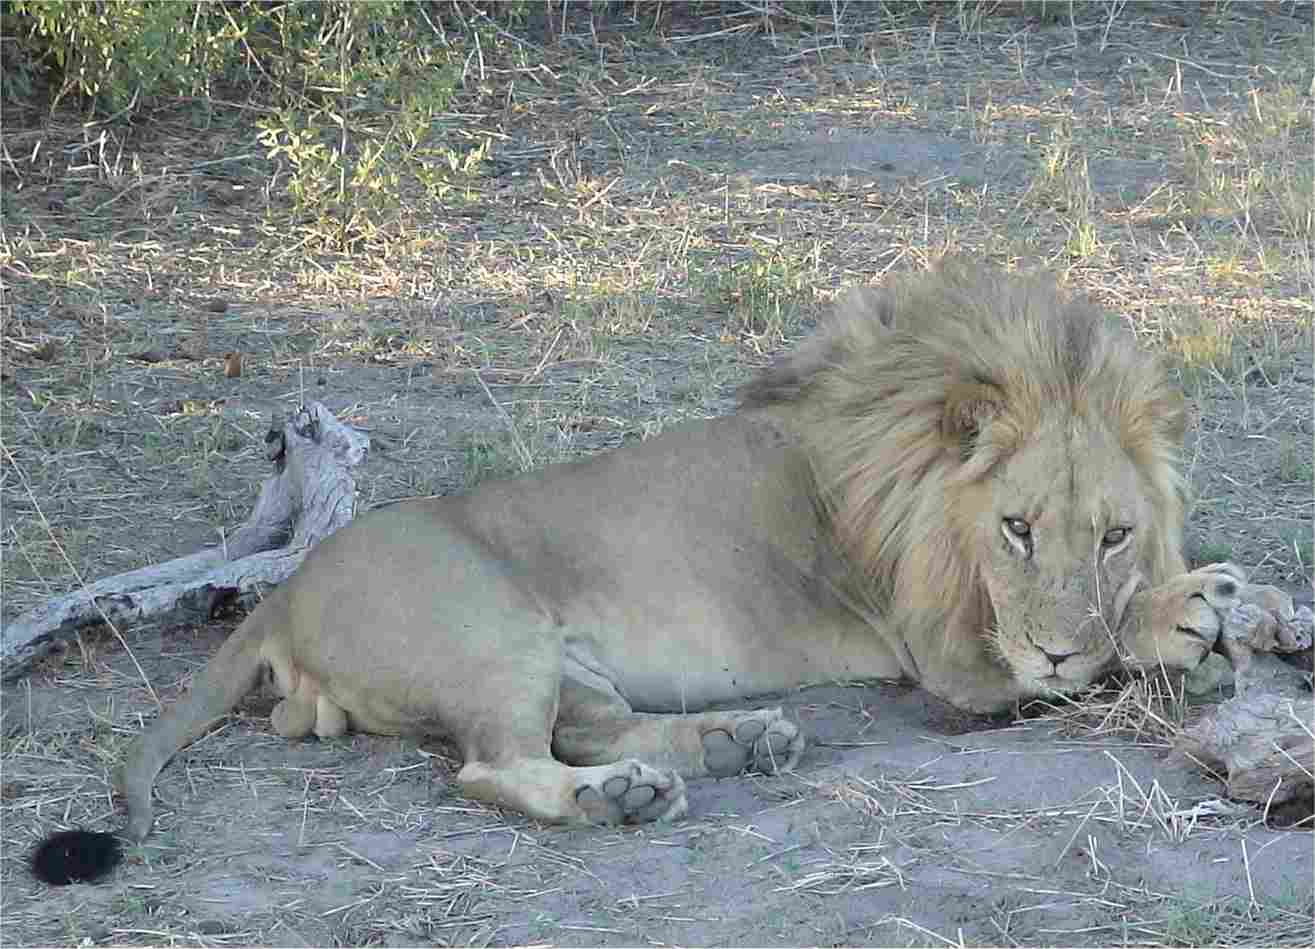 The lion watched us intently for a couple of minutes, then flopped his head down and took a nap!  Photo by FG.